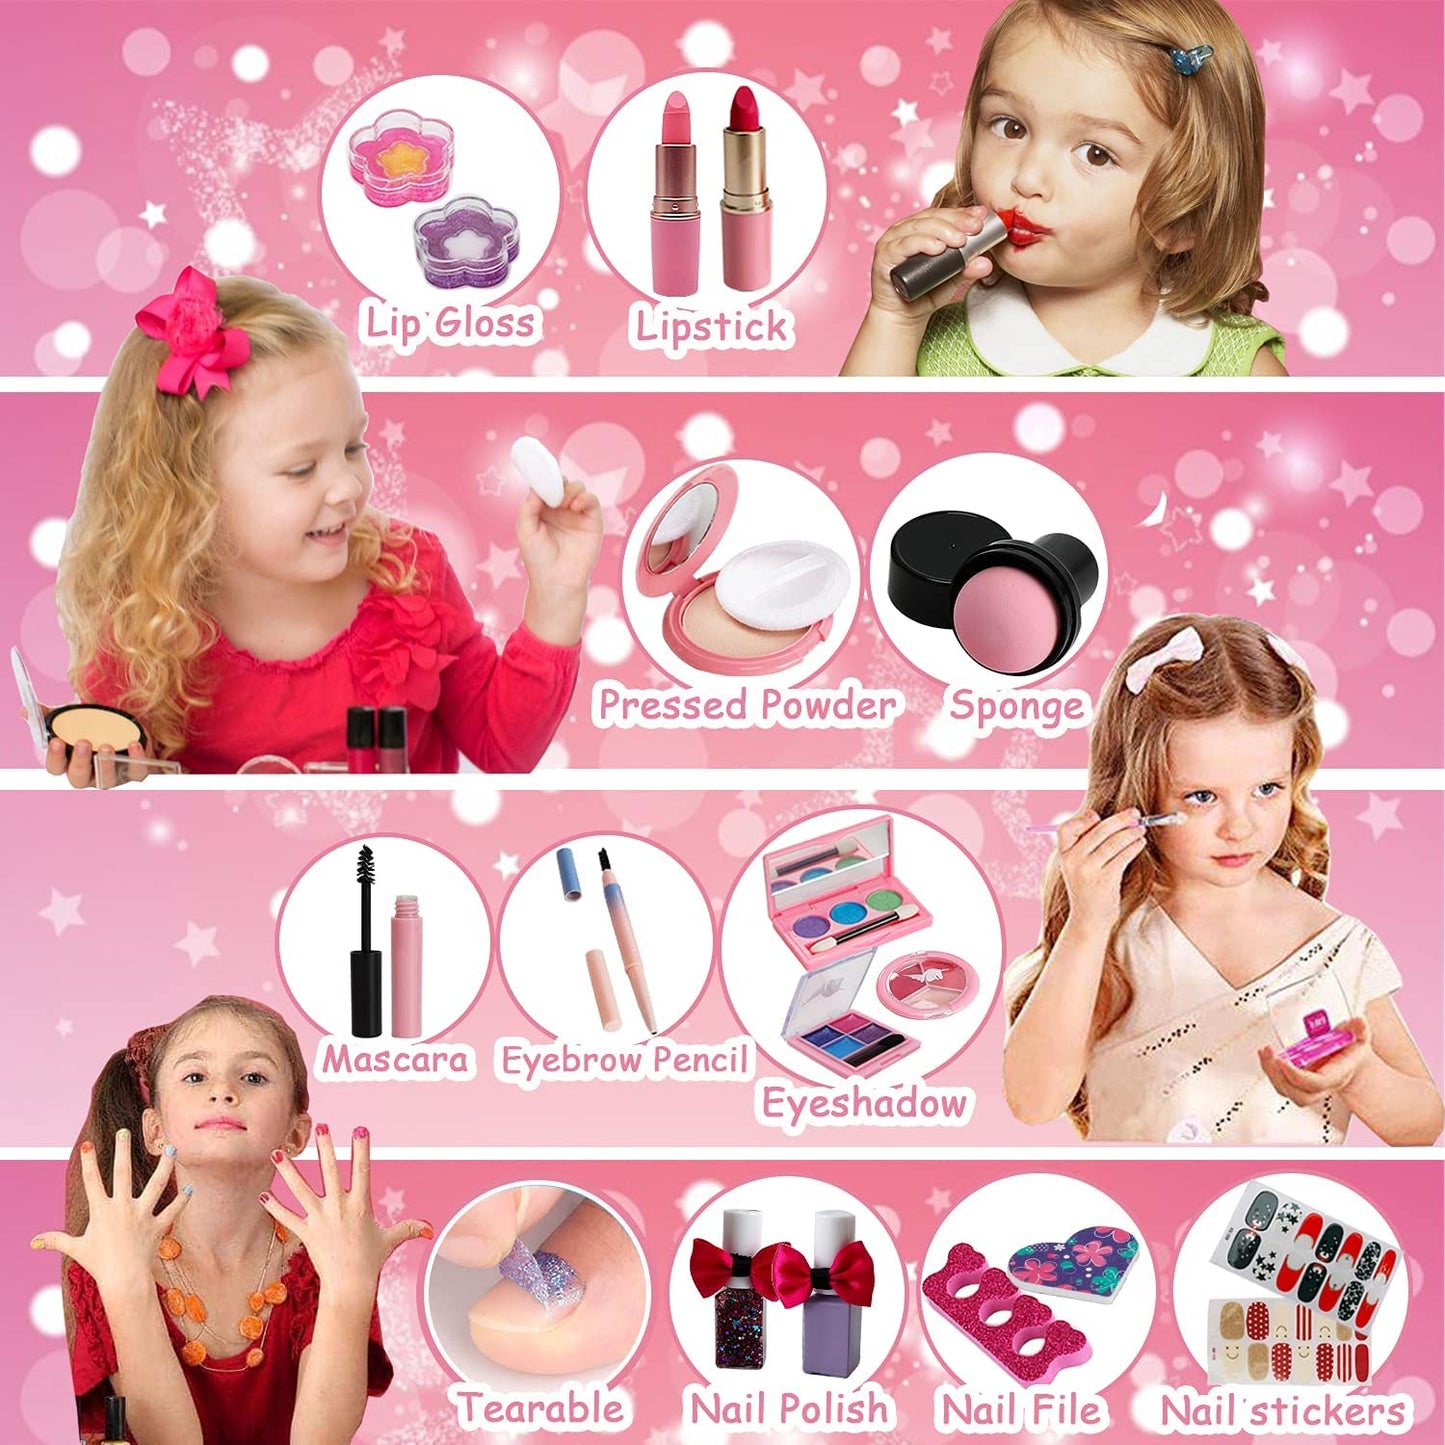 Deluxe Washable Makeup Kit for Kids - Genuine Cosmetic Set for Girls, Little Girl's Makeup Collection for Toddlers and Young Princesses, Gifts for Girls Ages 4-10